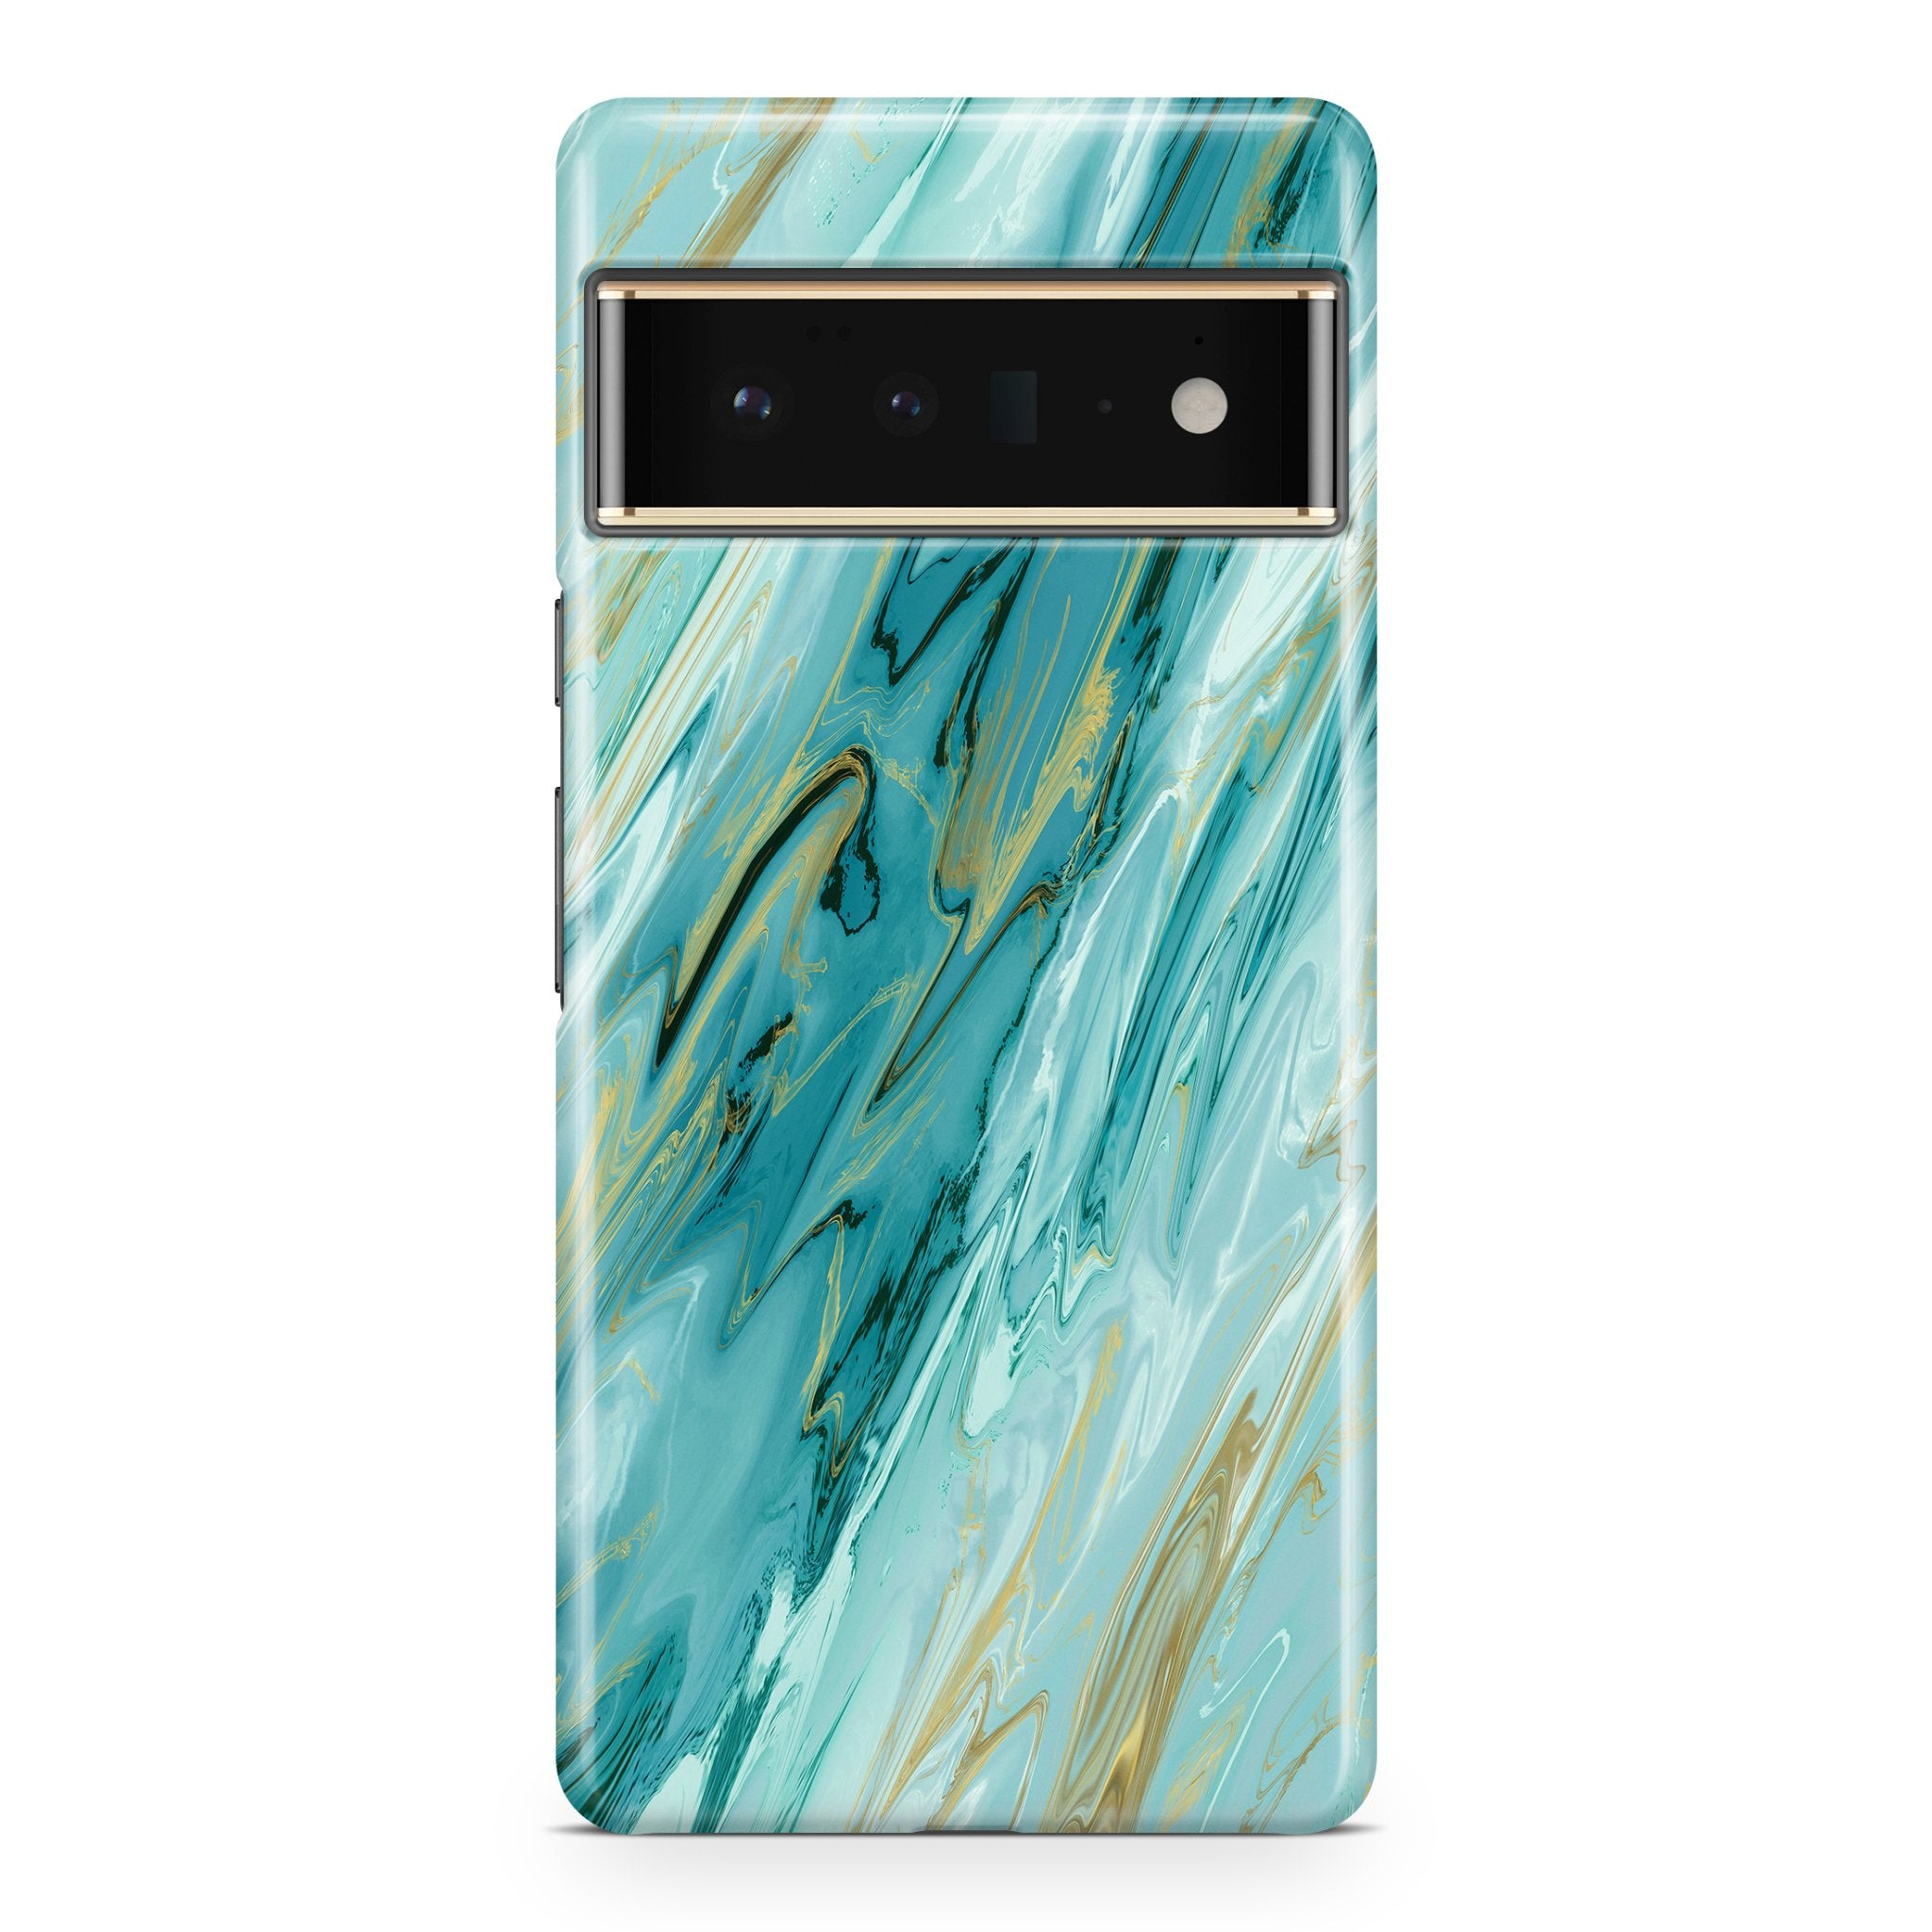 Turquoise & Gold Agate - Google phone case designs by CaseSwagger